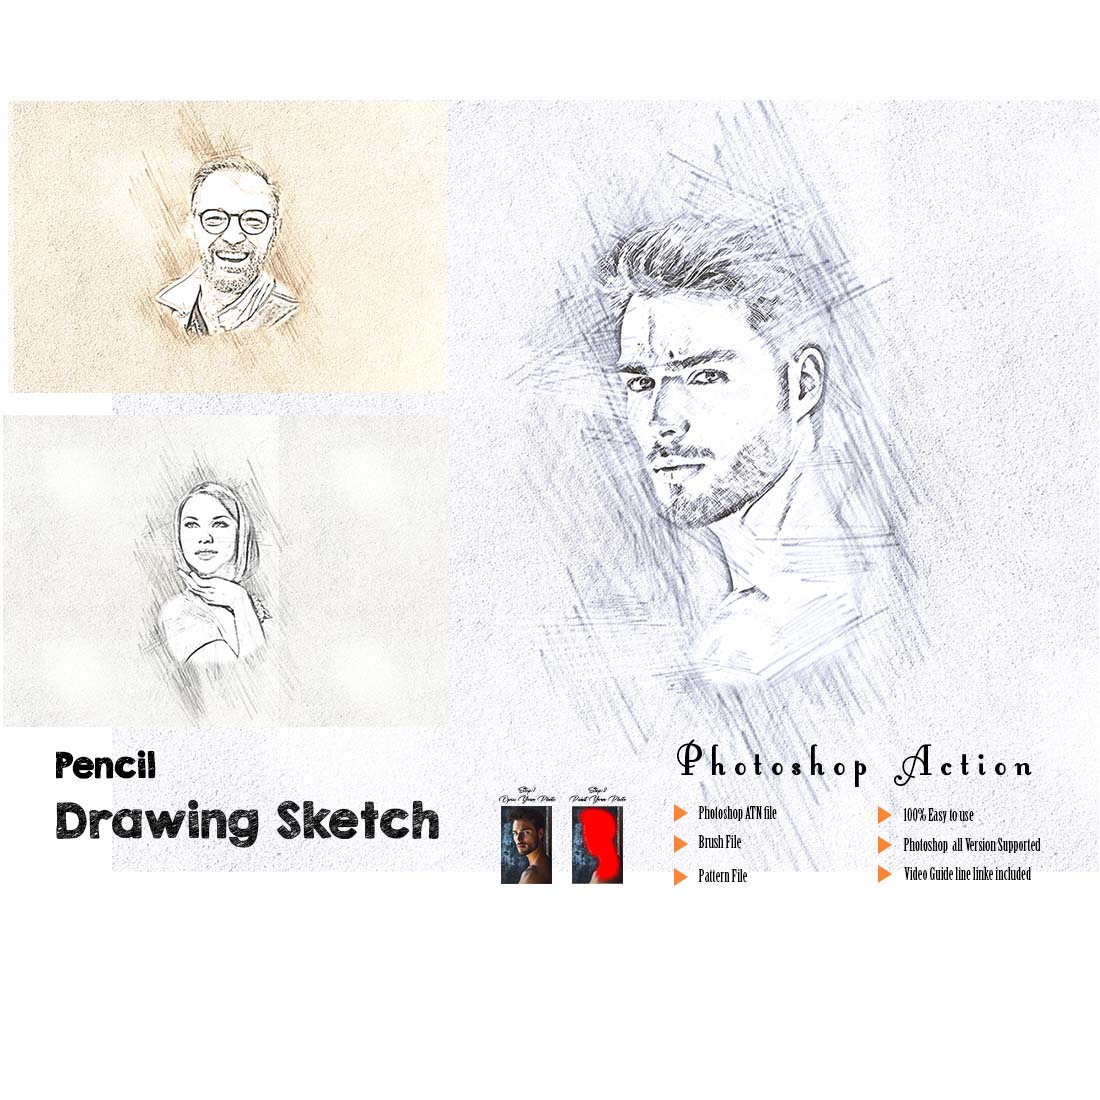 Pencil Drawing Sketch Photoshop Action cover image.